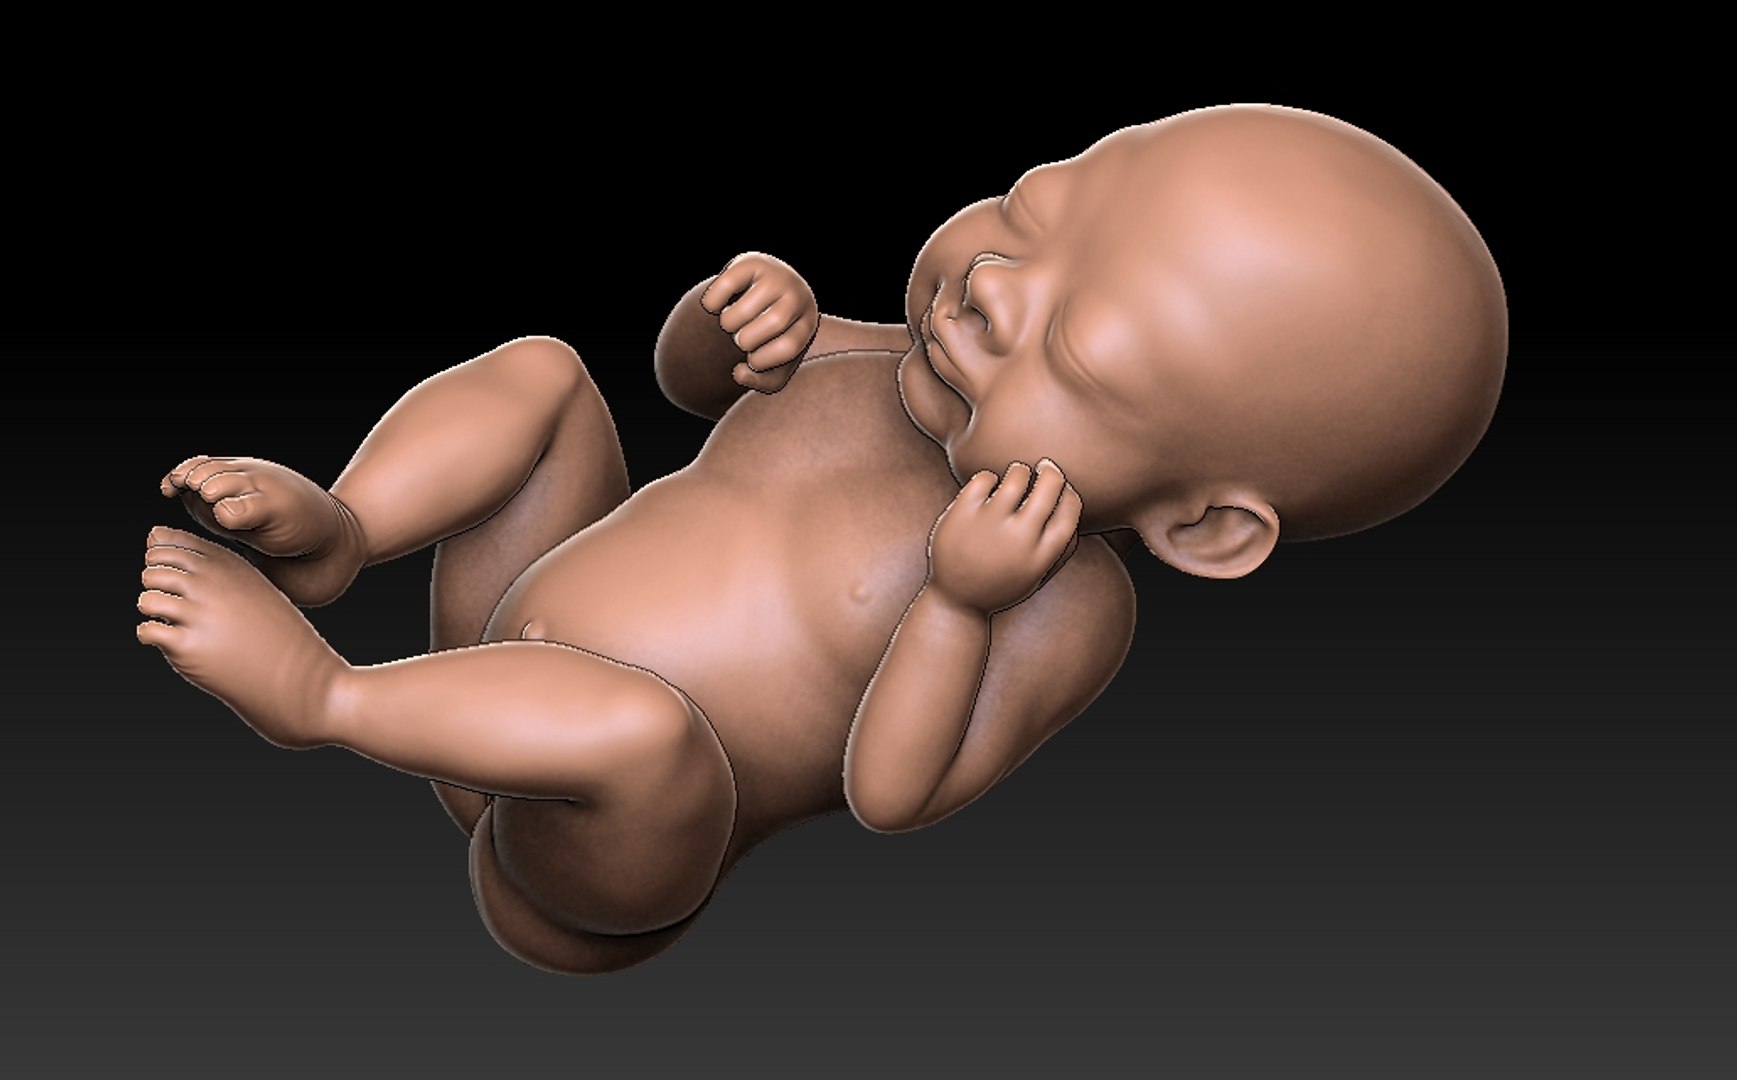 189,372 New Born Baby Images, Stock Photos, 3D objects, & Vectors